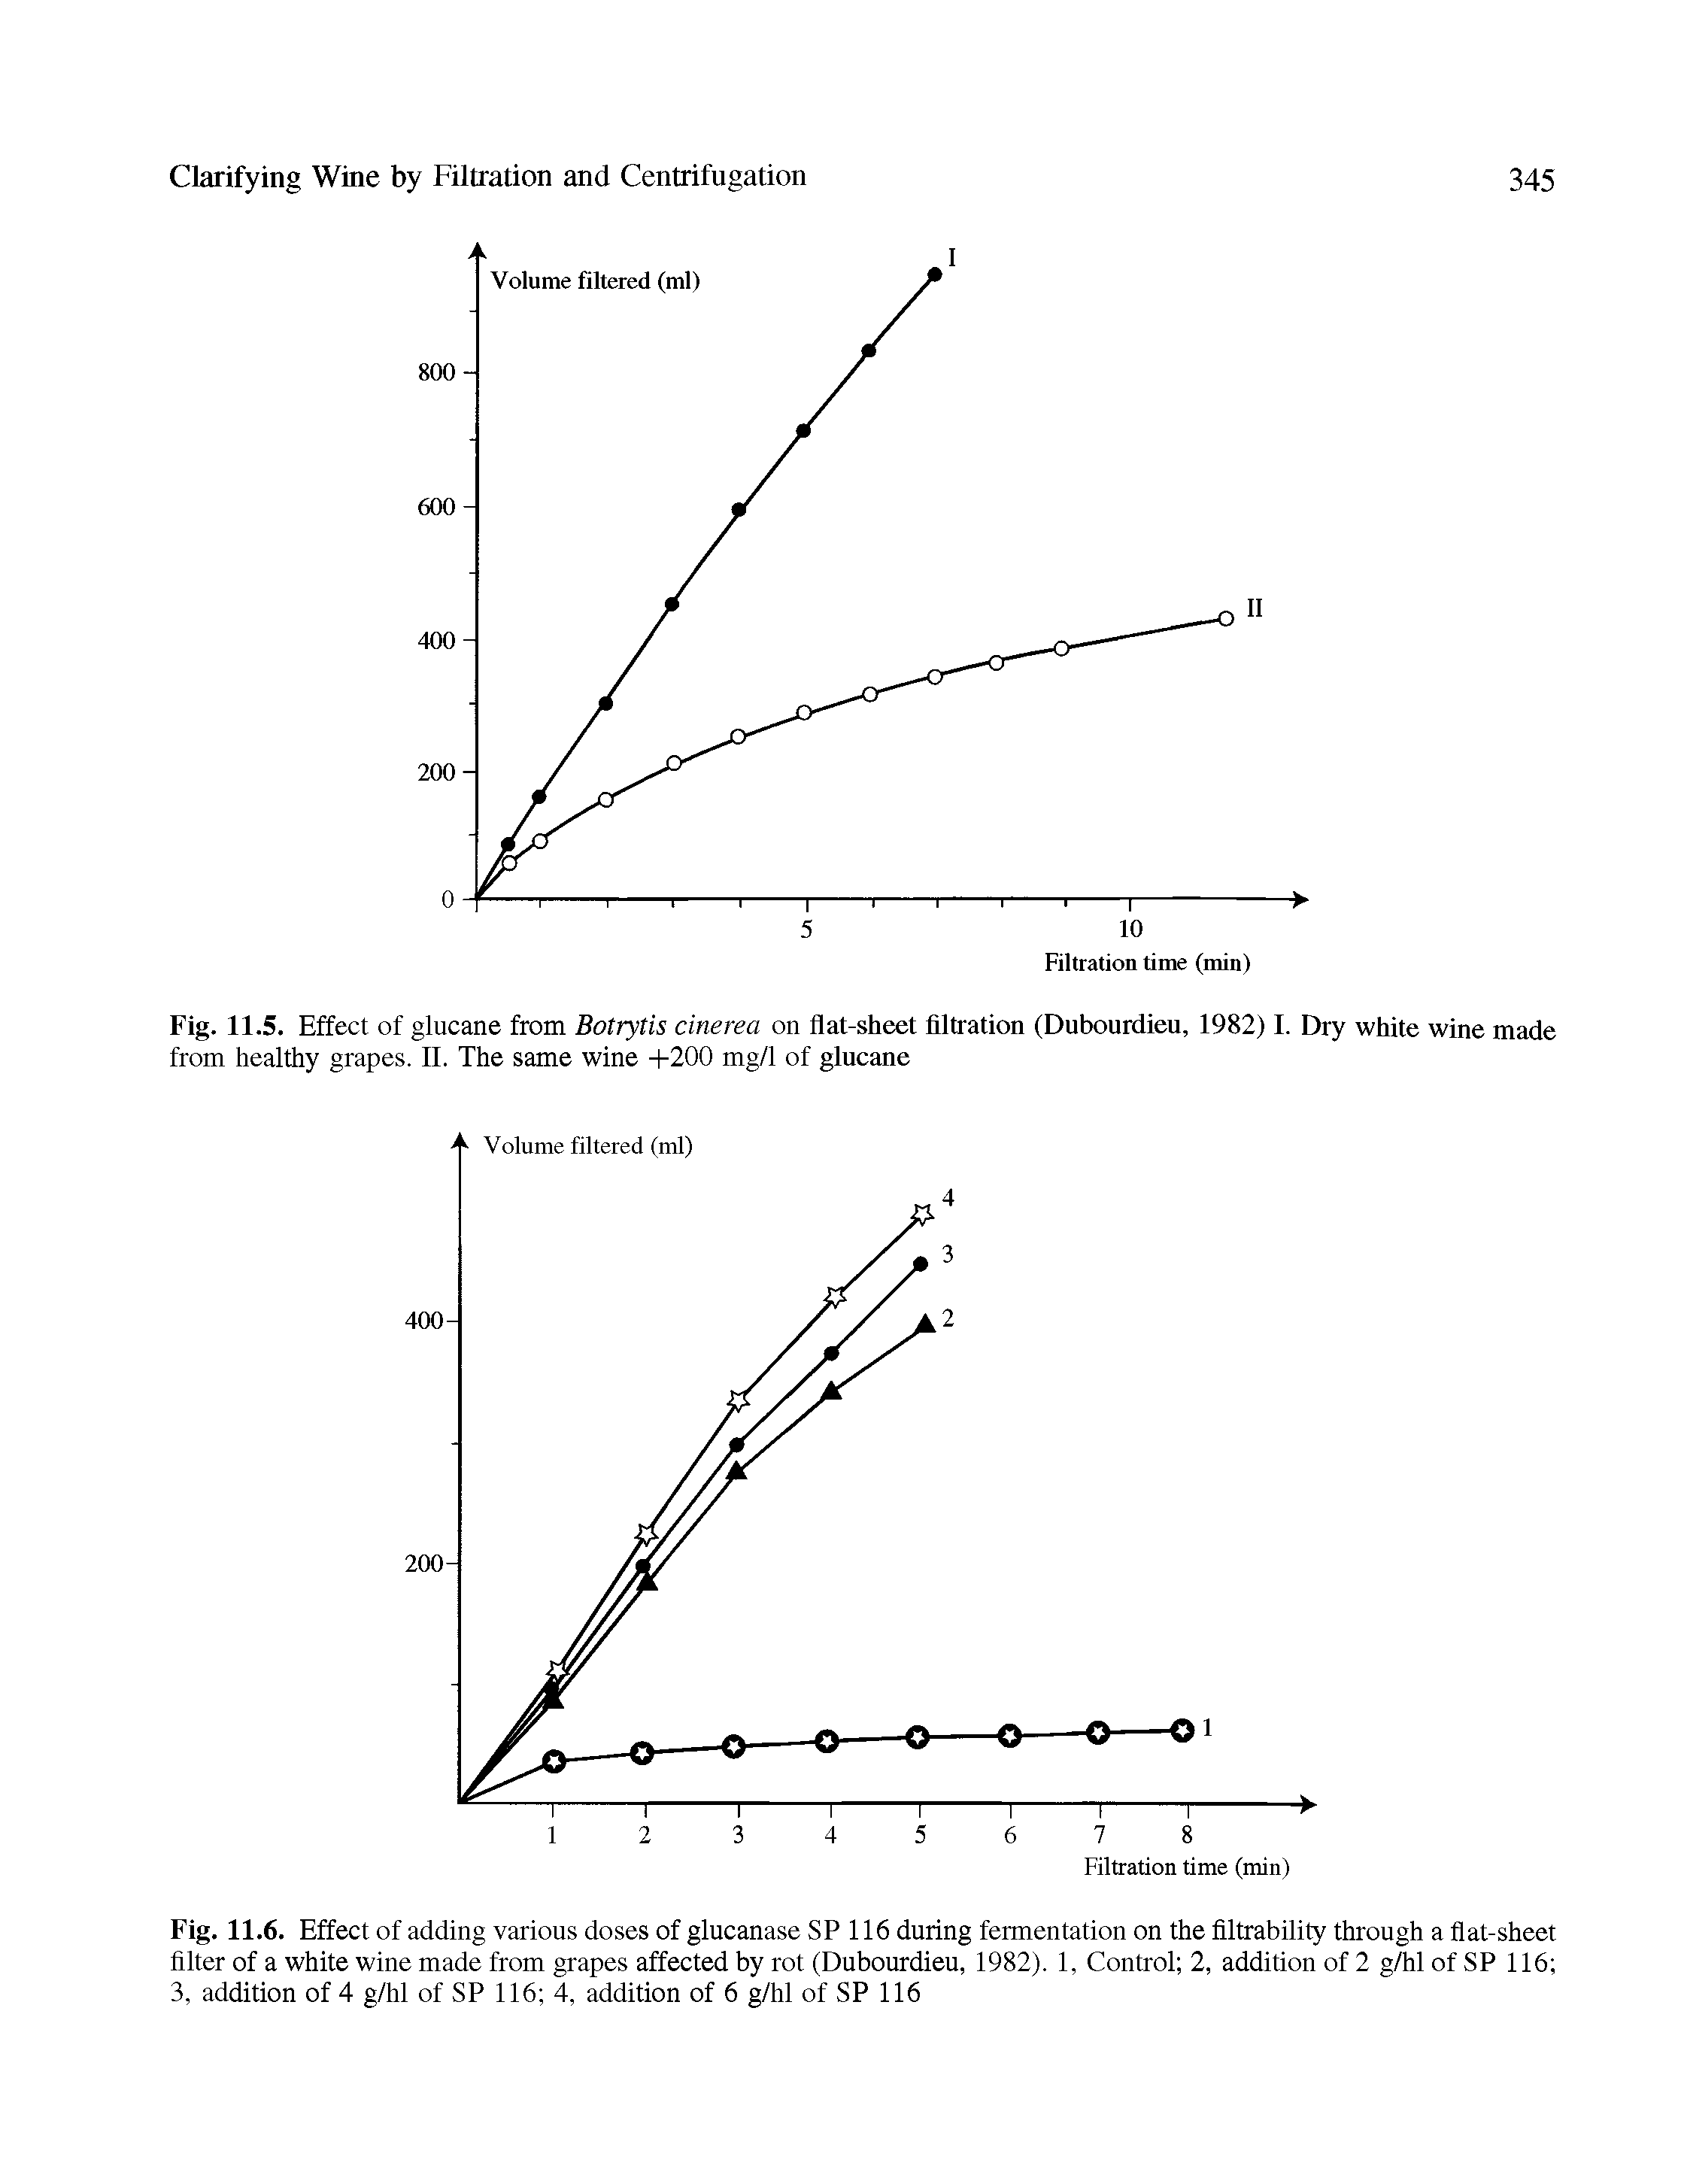 Fig. 11.5. Effect of glucane from Botrytis cinerea on flat-sheet filtration (Dubourdieu, 1982) 1. Dry white wine made from healthy grapes. II. The same wine +200 mg/1 of glncane...